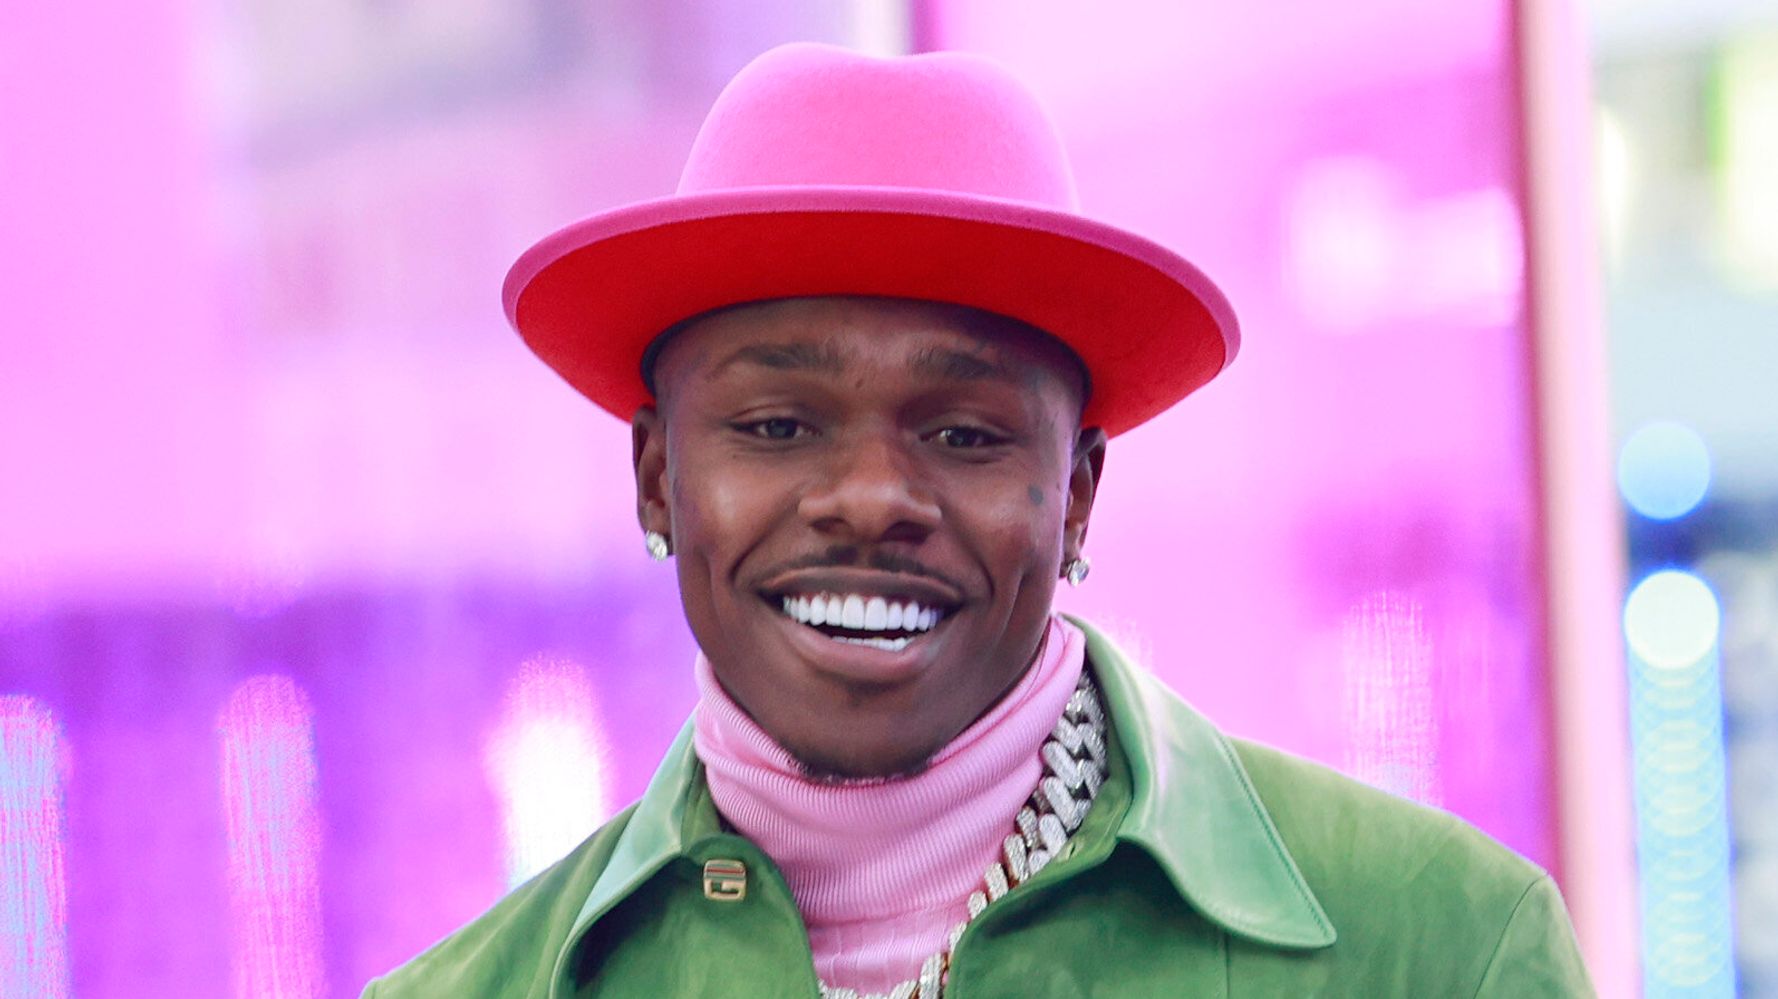 Miami Beach Police Questioning Rapper DaBaby About Shooting